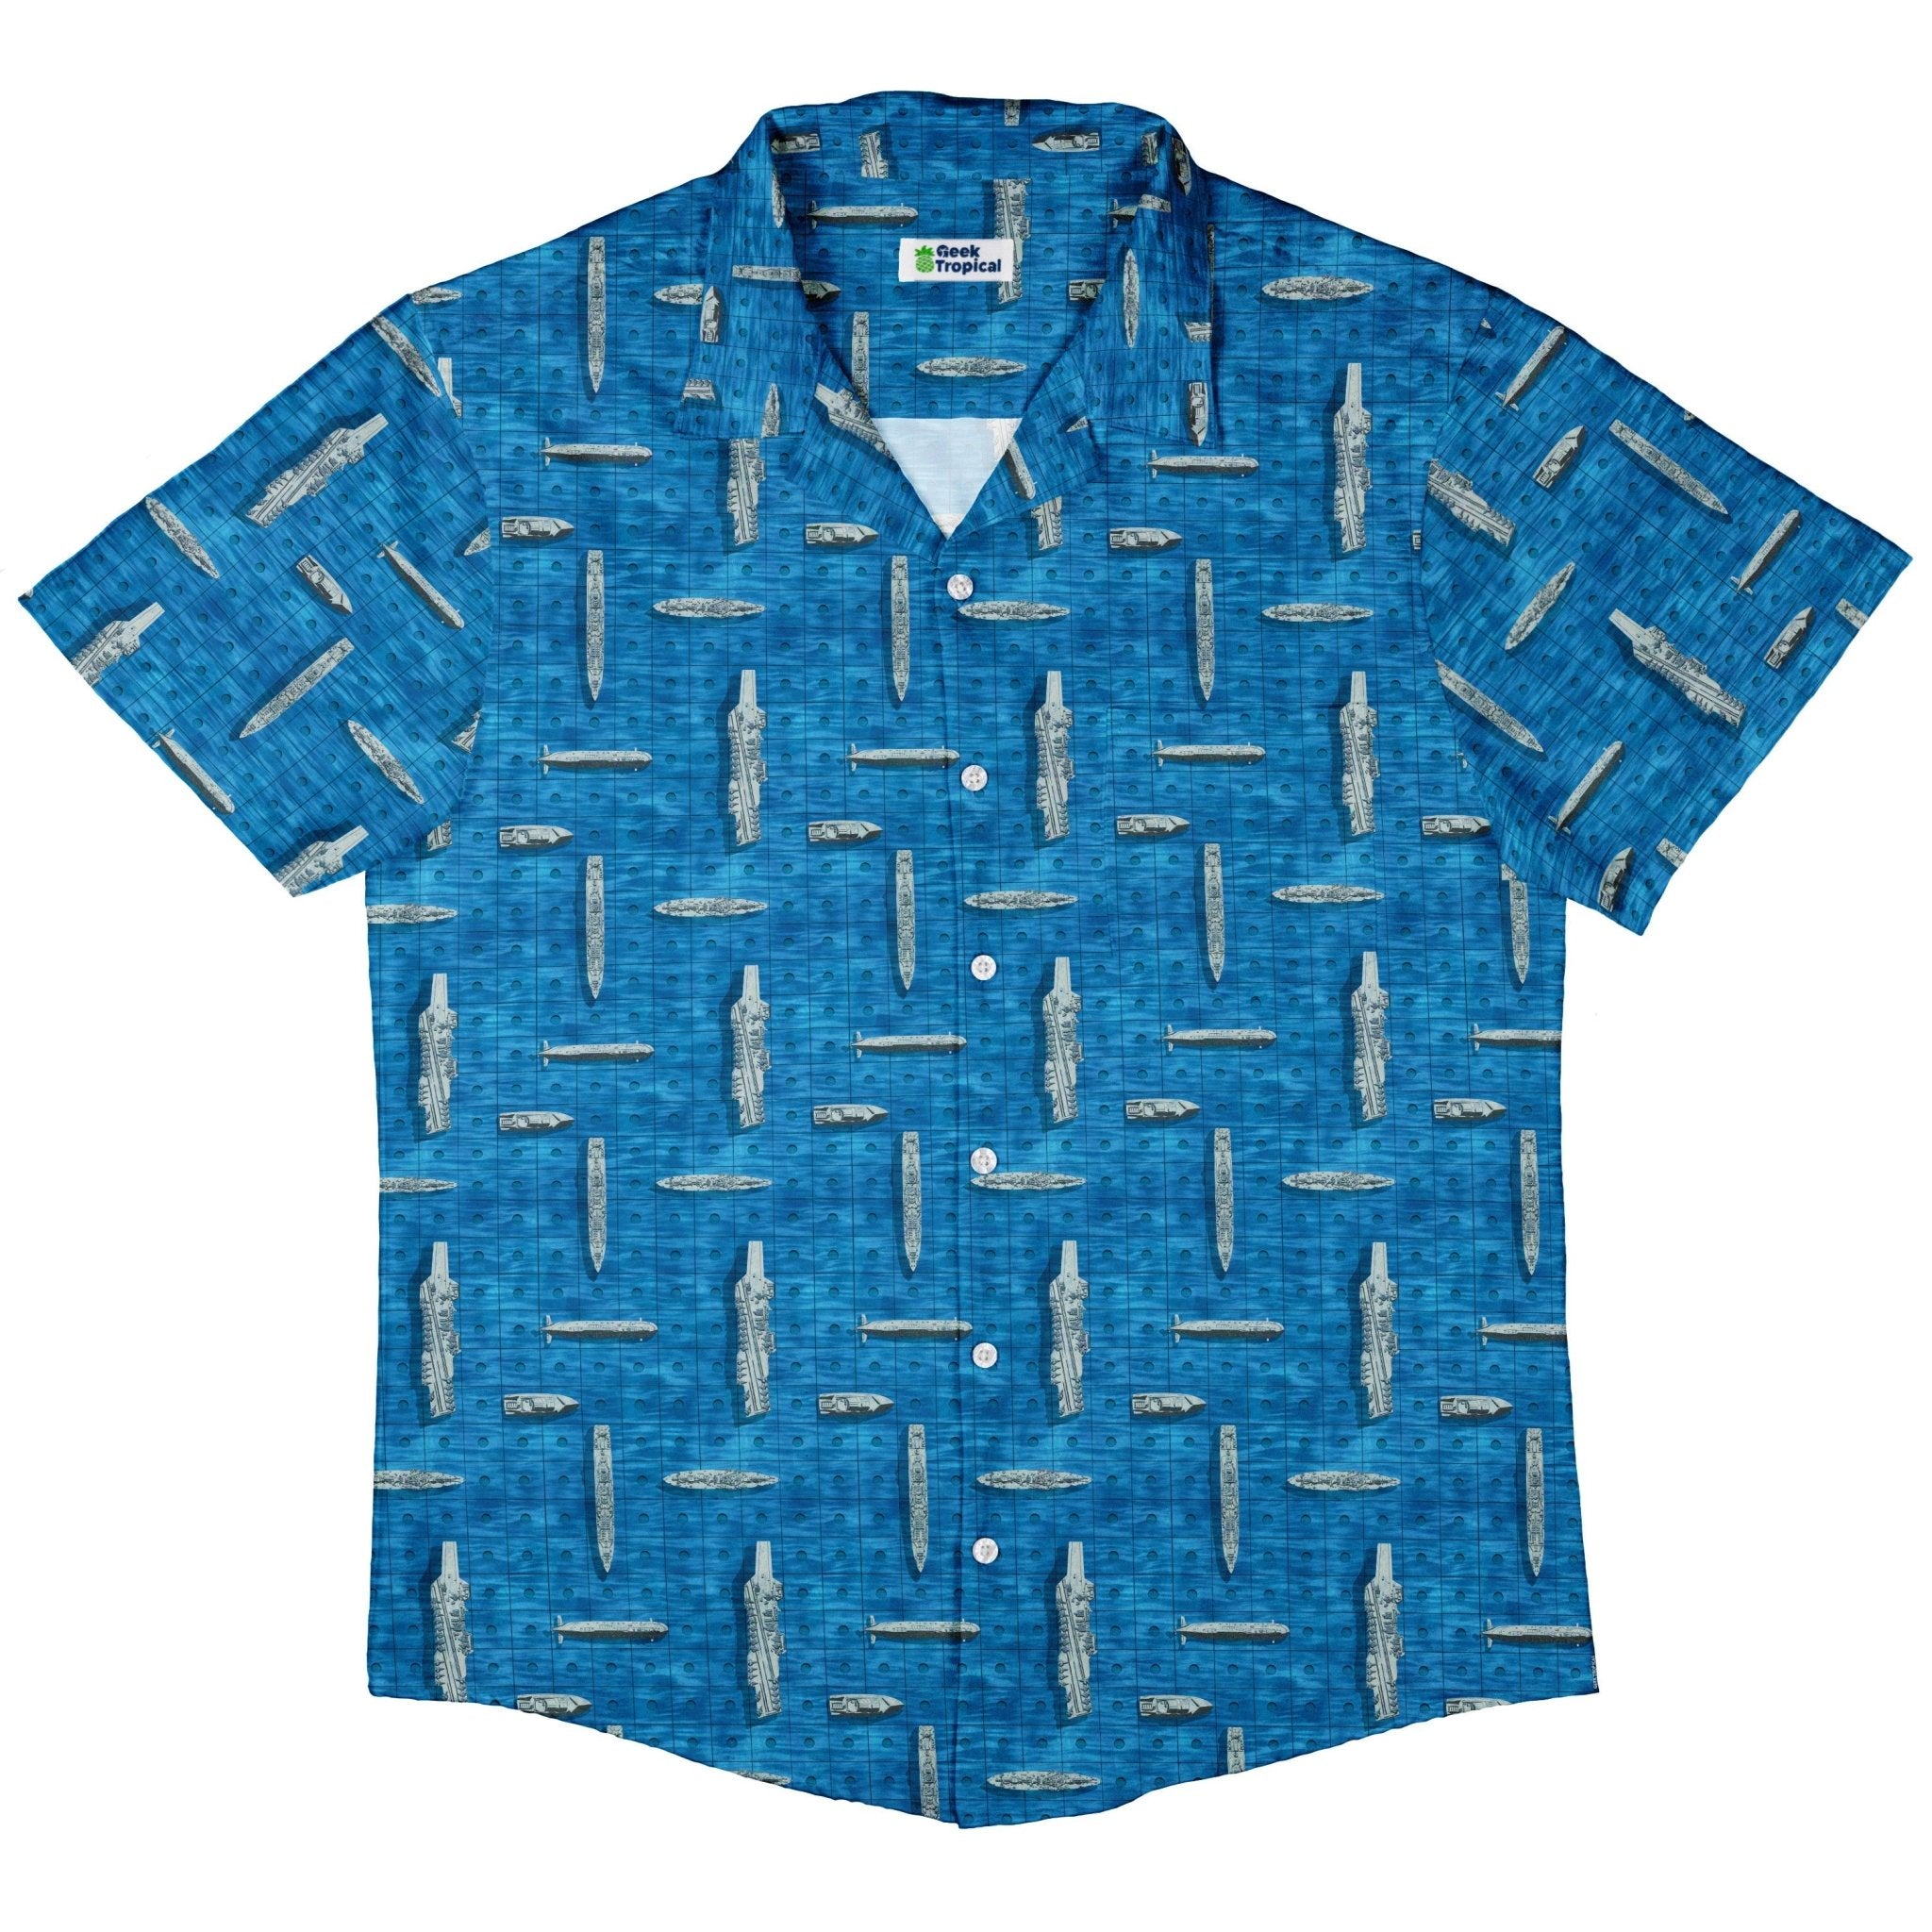 Battleship Button Up Shirt - adult sizing - board game print - Designs by Nathan